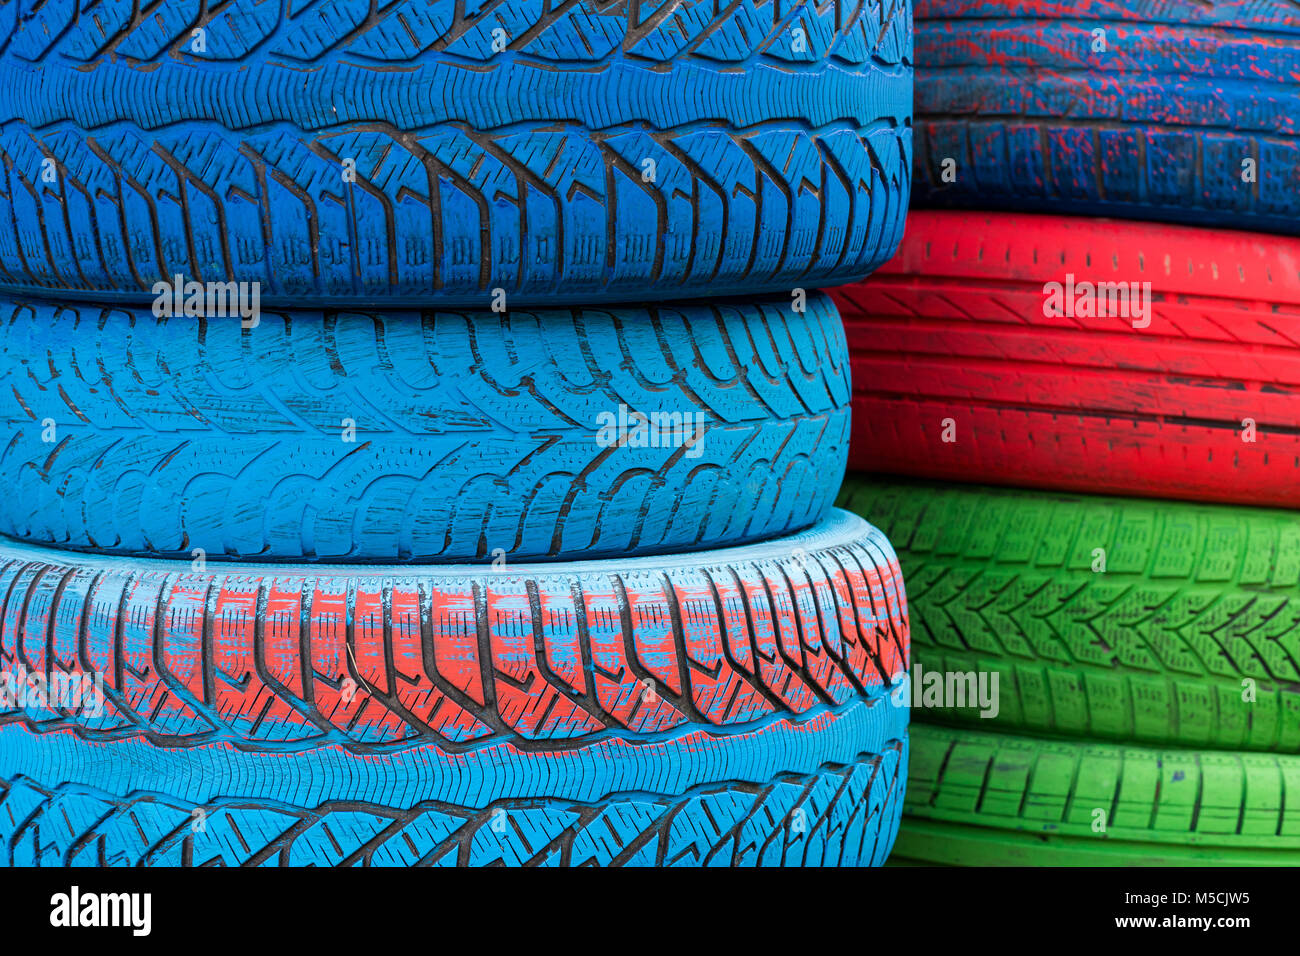 Colored tires painted in blue, green and red colors Stock Photo